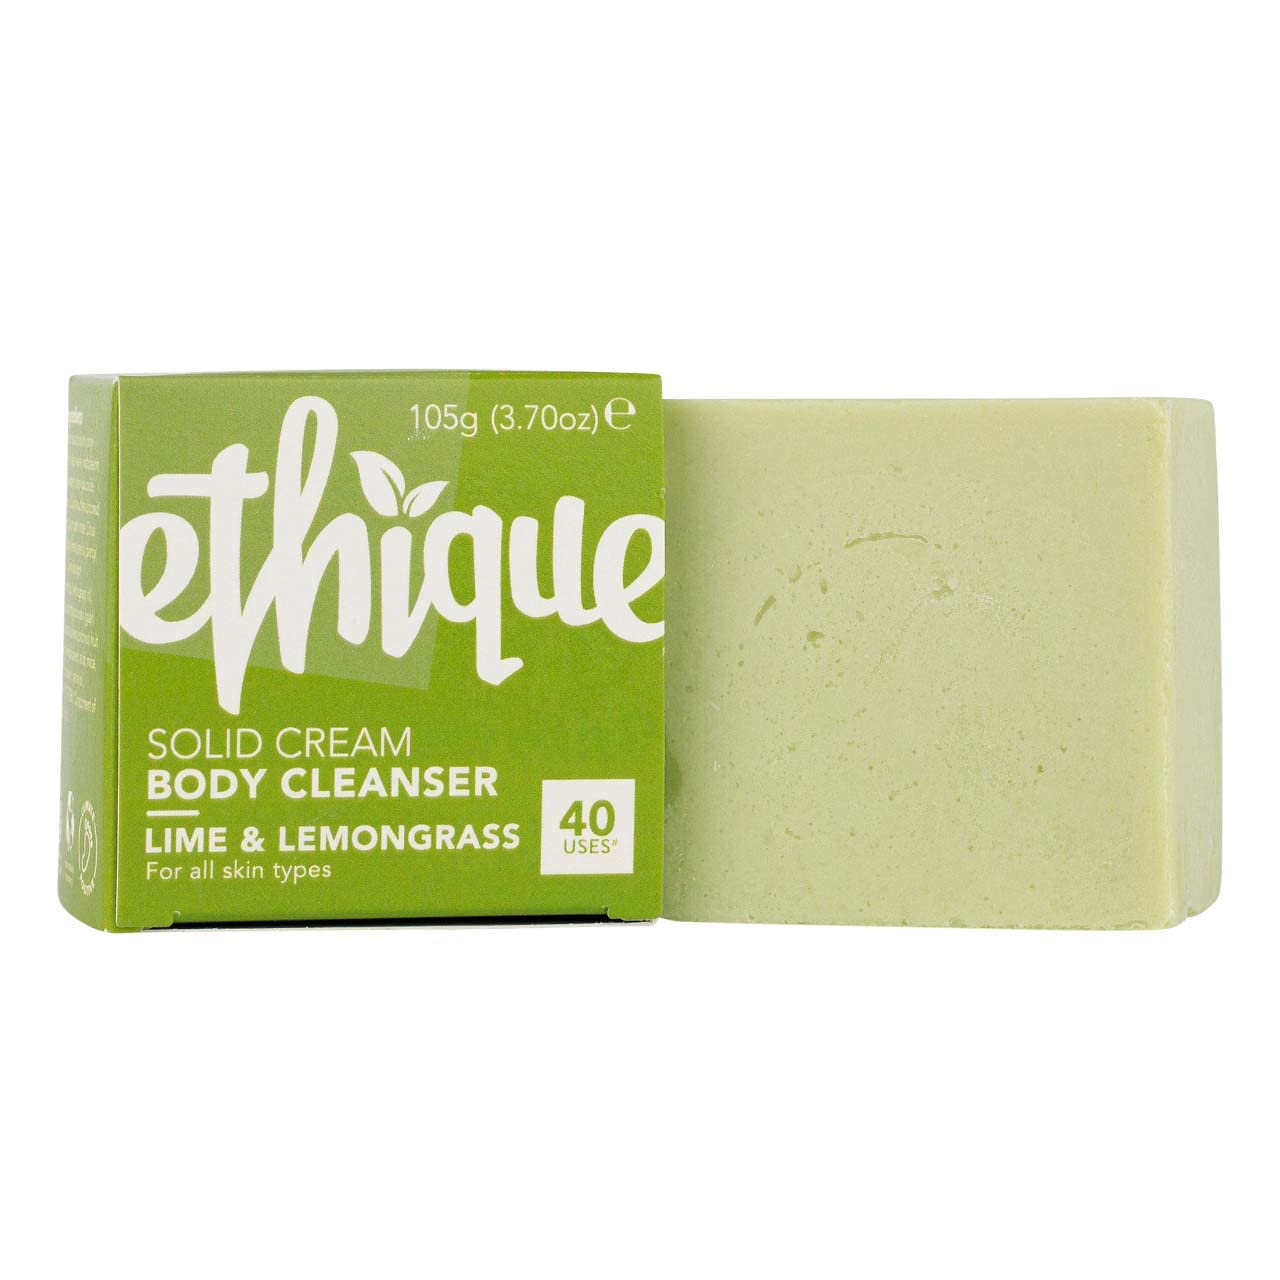 Ethique Lime & Lemongrass Solid Cream Body Cleanser - Body Wash for Sensitive Skin - Plastic-Free, Vegan, Cruelty-Free, Eco-Friendly, 3.7 oz (Pack of 1)